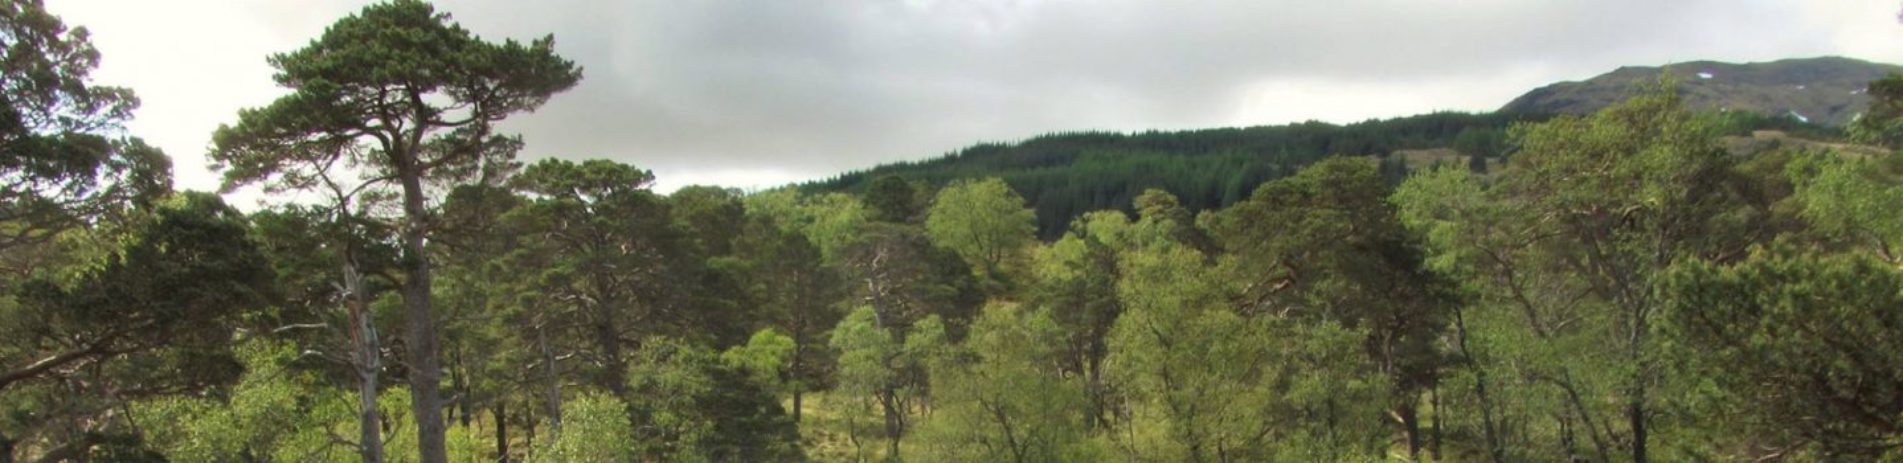 remnants-of-caledonian-pine-forest-near-tyndrum